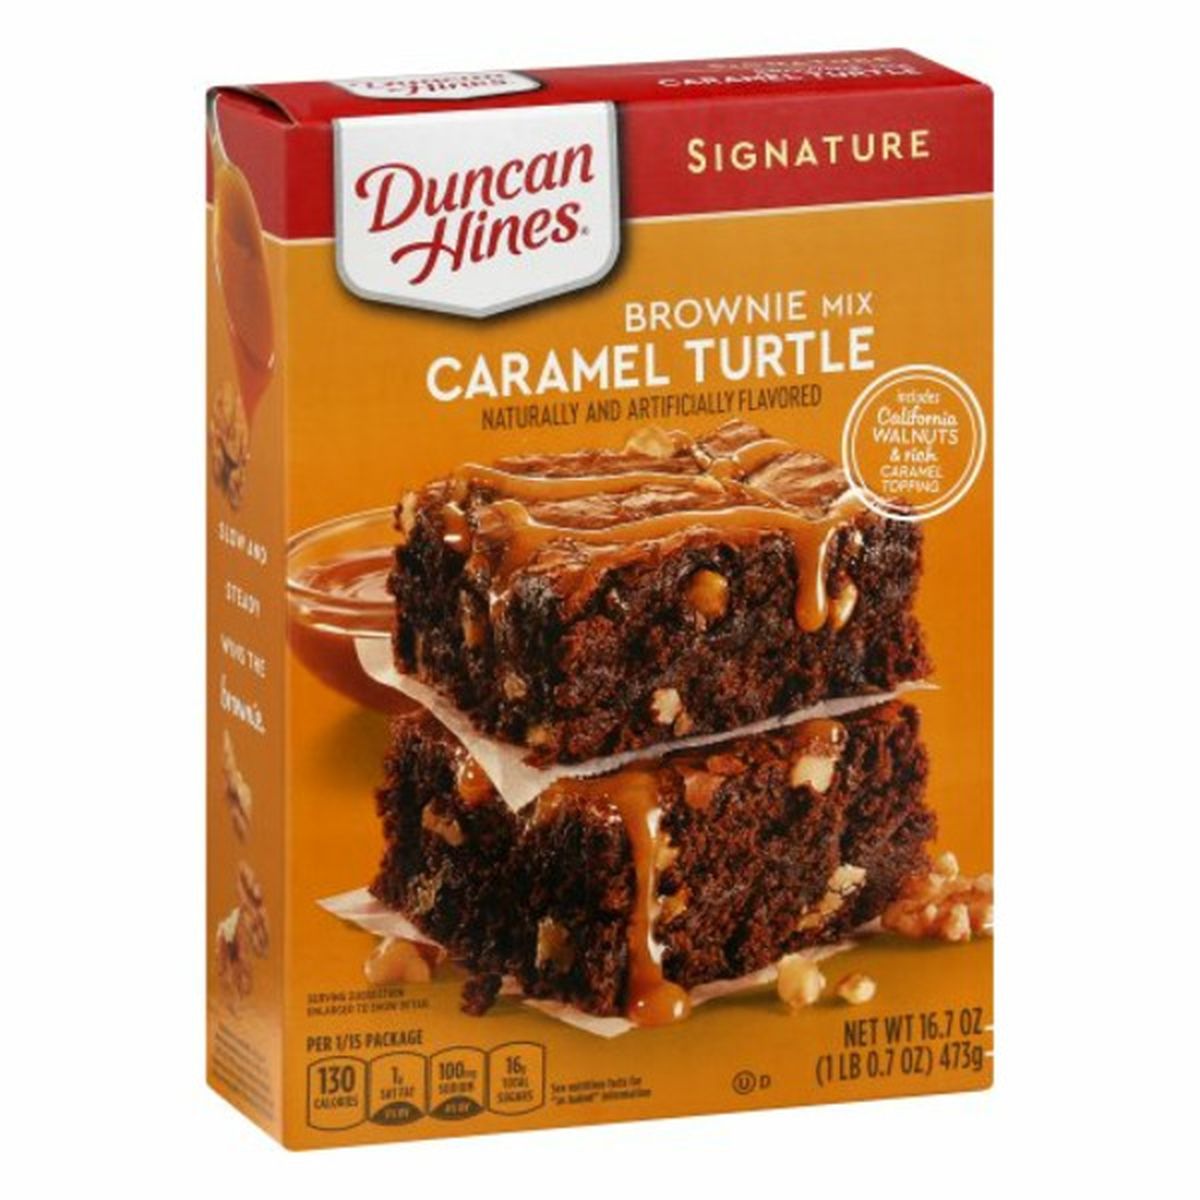 Calories in Duncan Hines Brownie Mix, Caramel Turtle